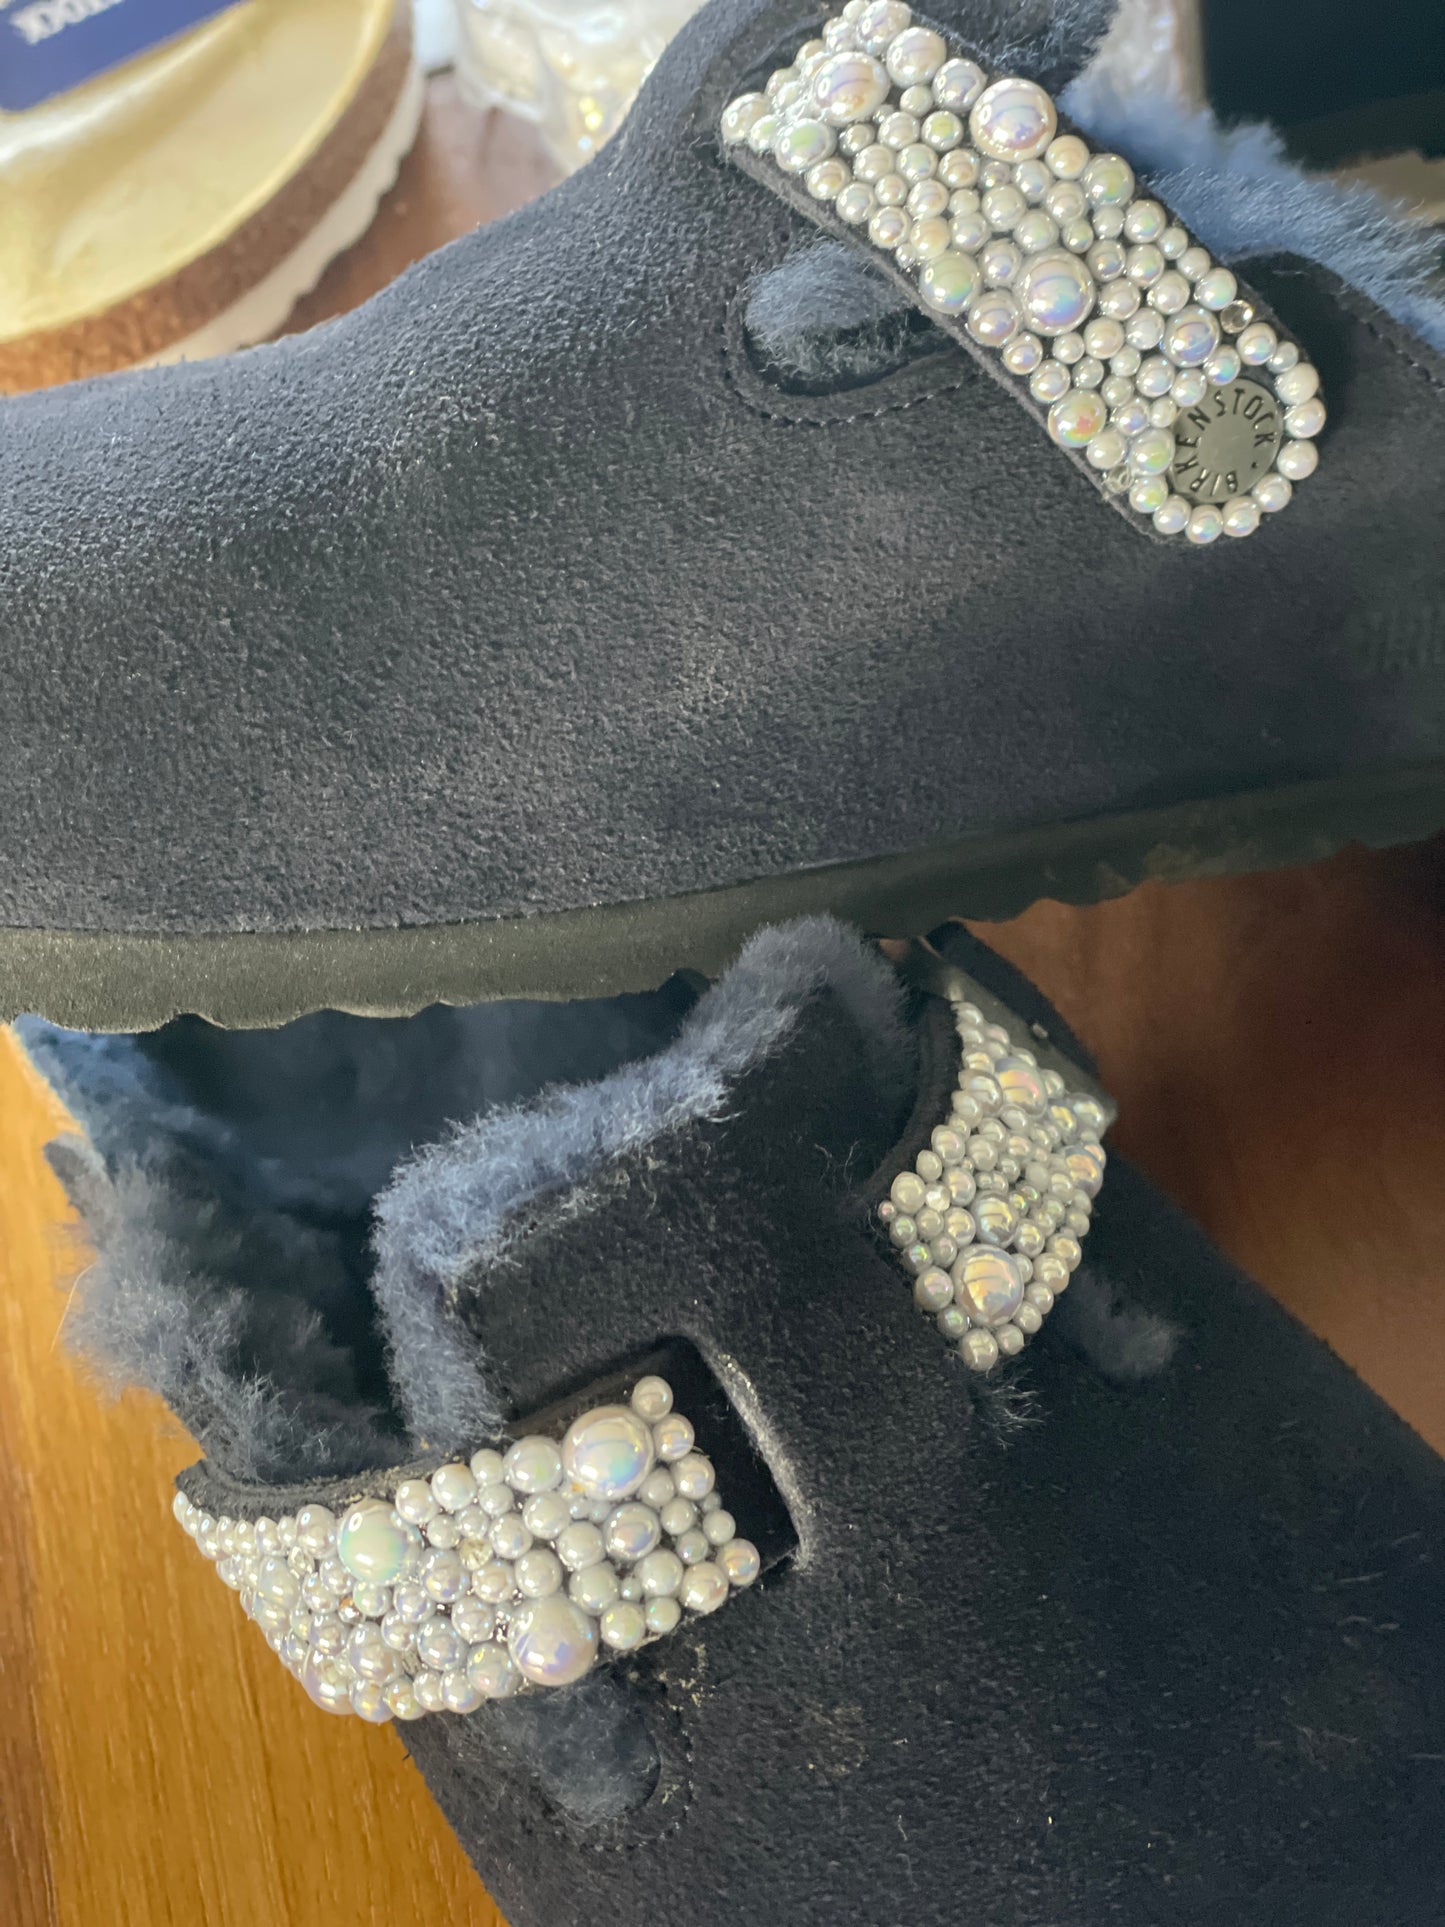 Birkenstock Boston with Shearling Lining with Pearls or Rhinestones